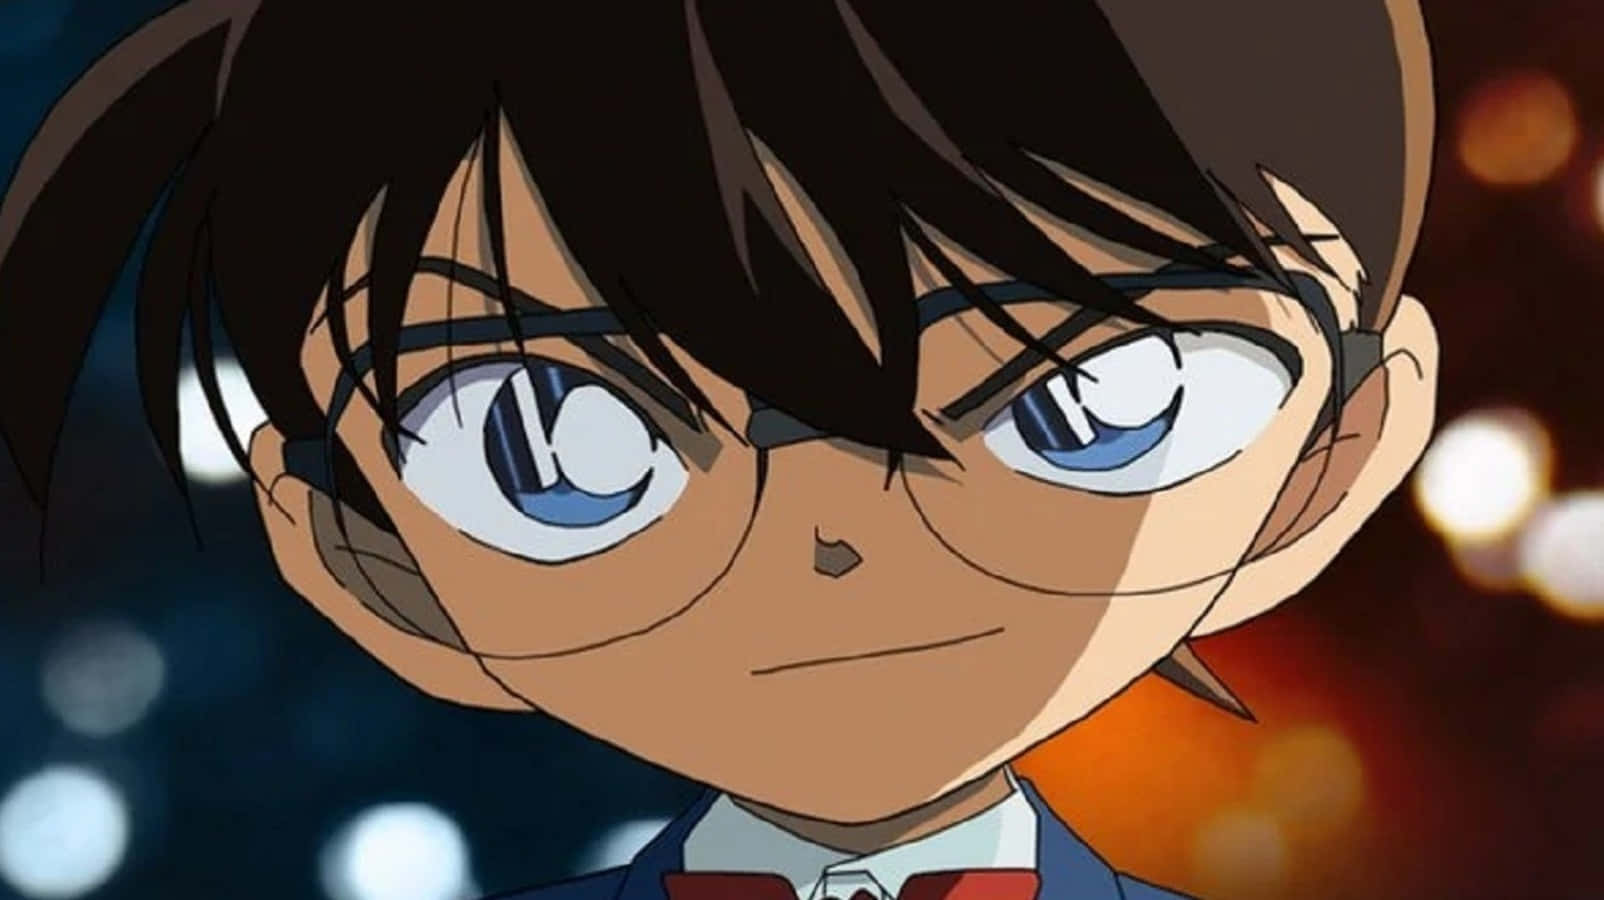 "Uncover Clues with Detective Conan"